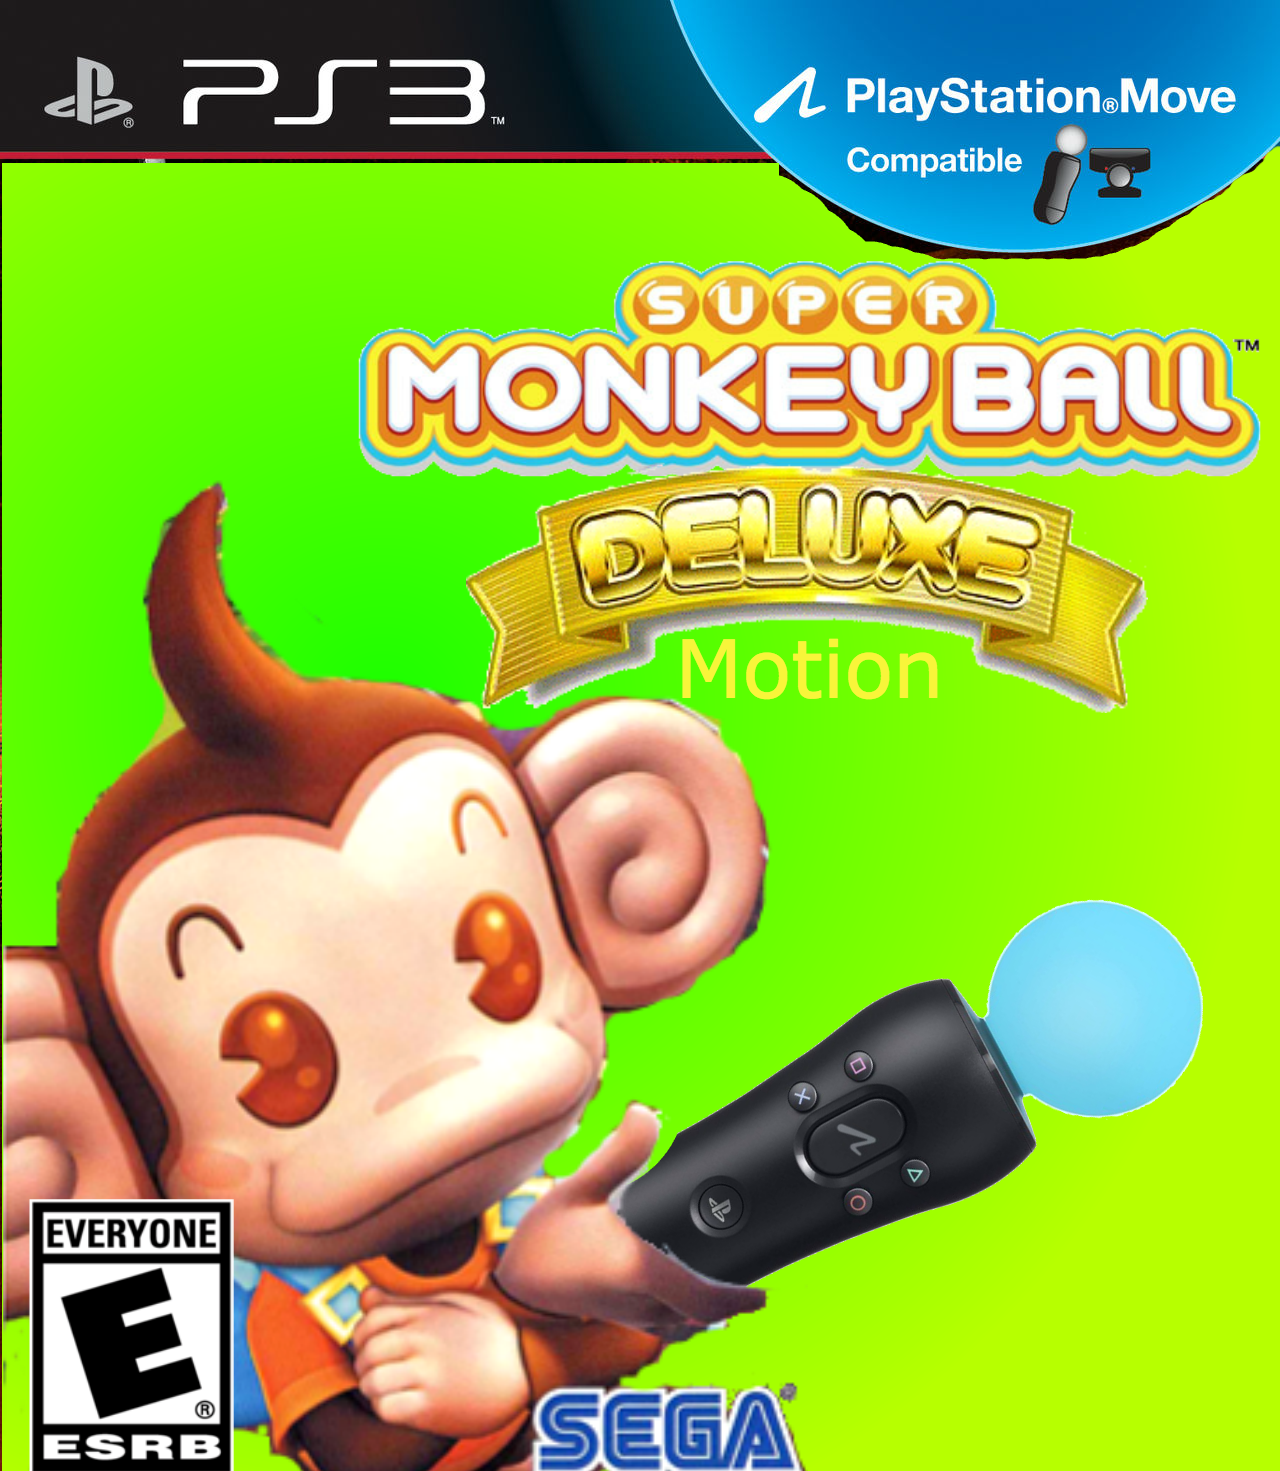 Super Monkey Ball Deluxe Motion box cover